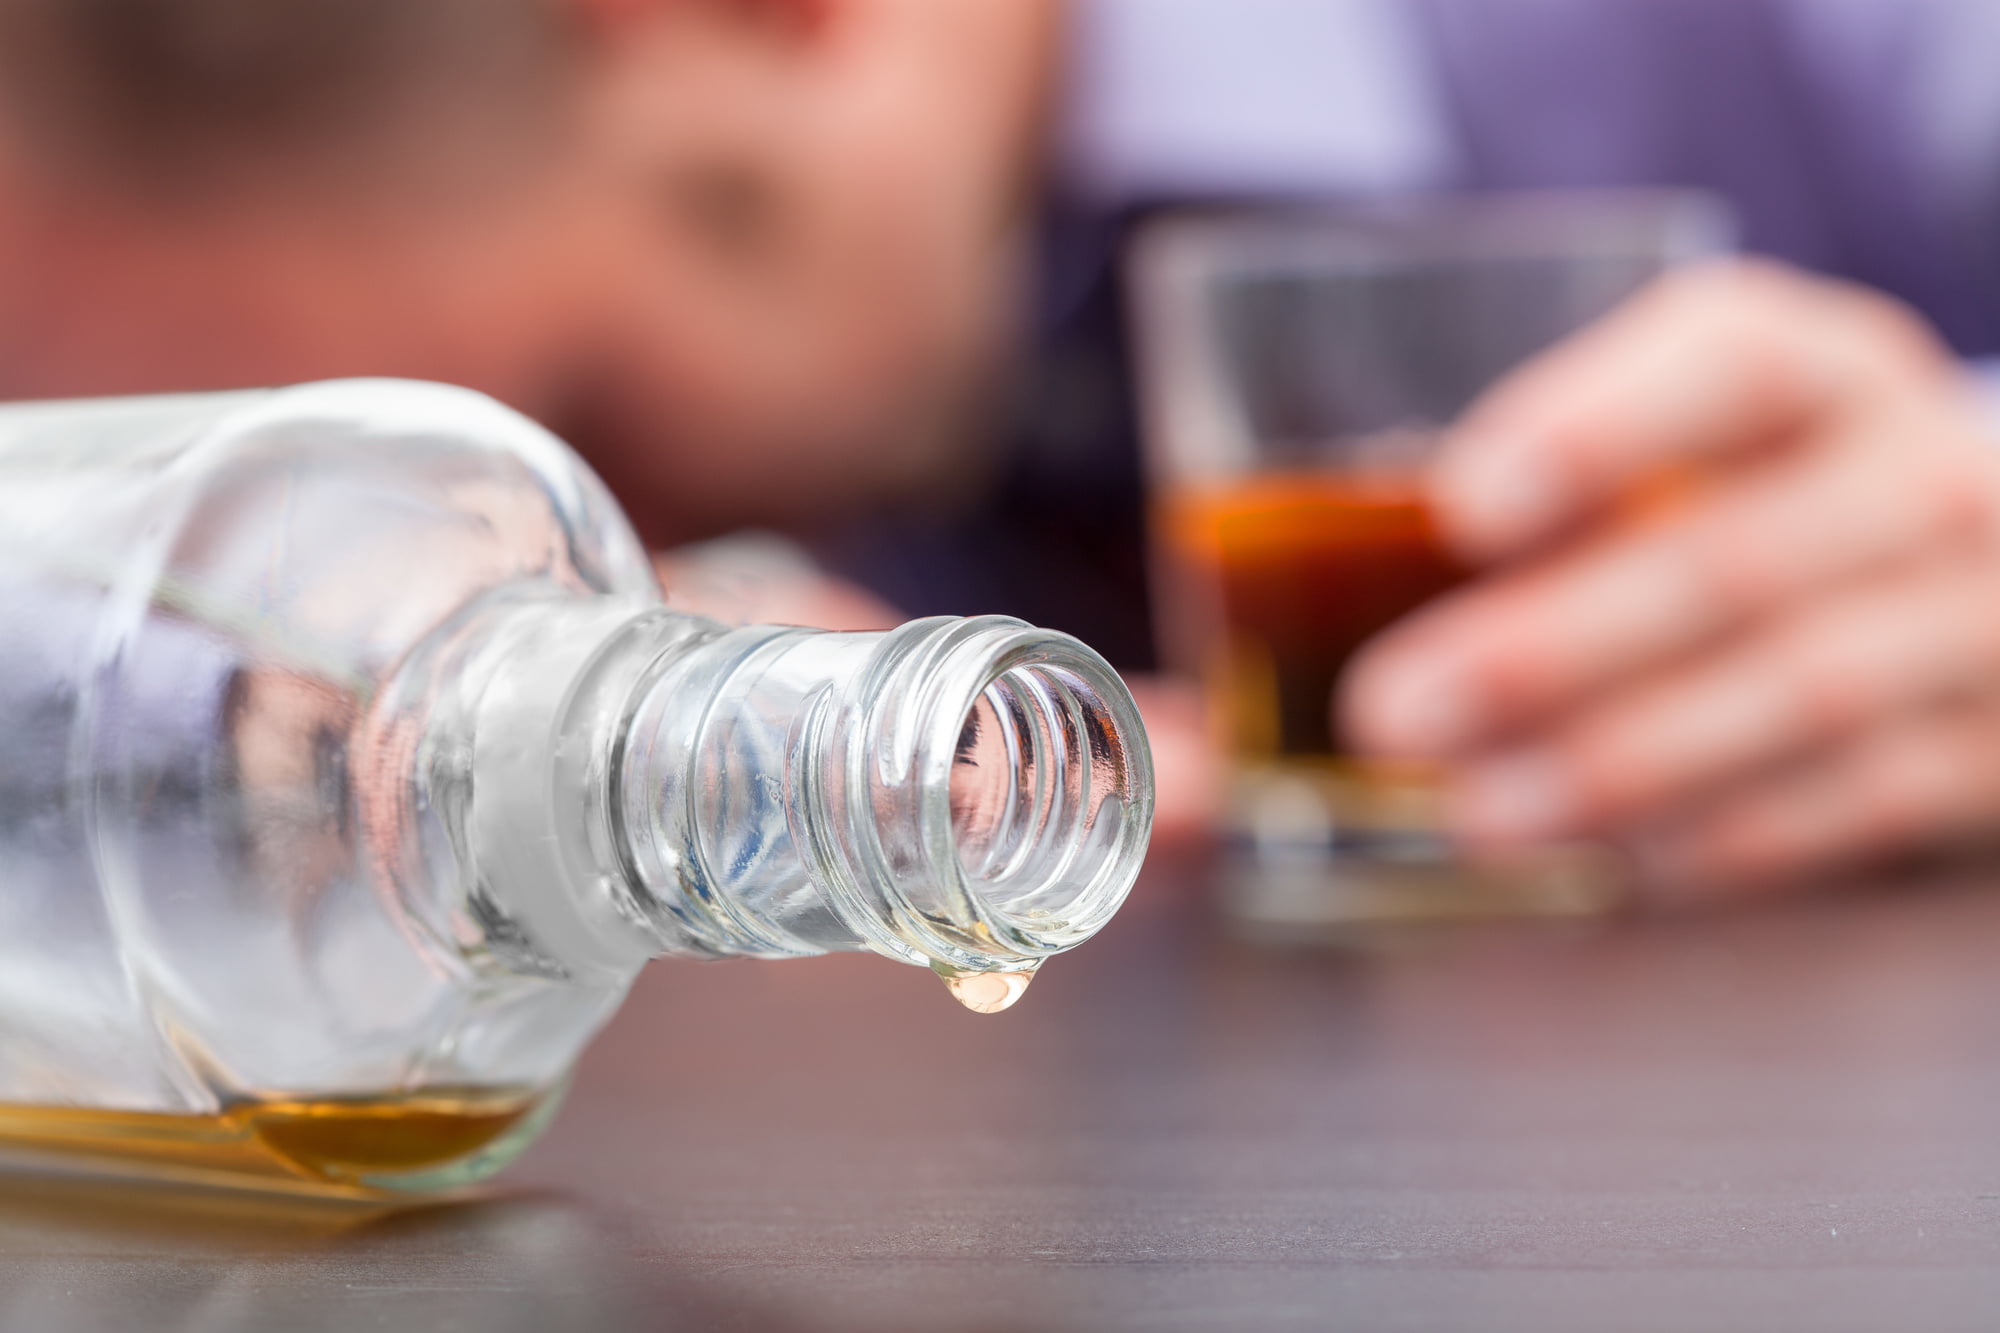 There are certain alcoholism warning signs that indicate help is needed. Review these top symptoms that need professional assistance.